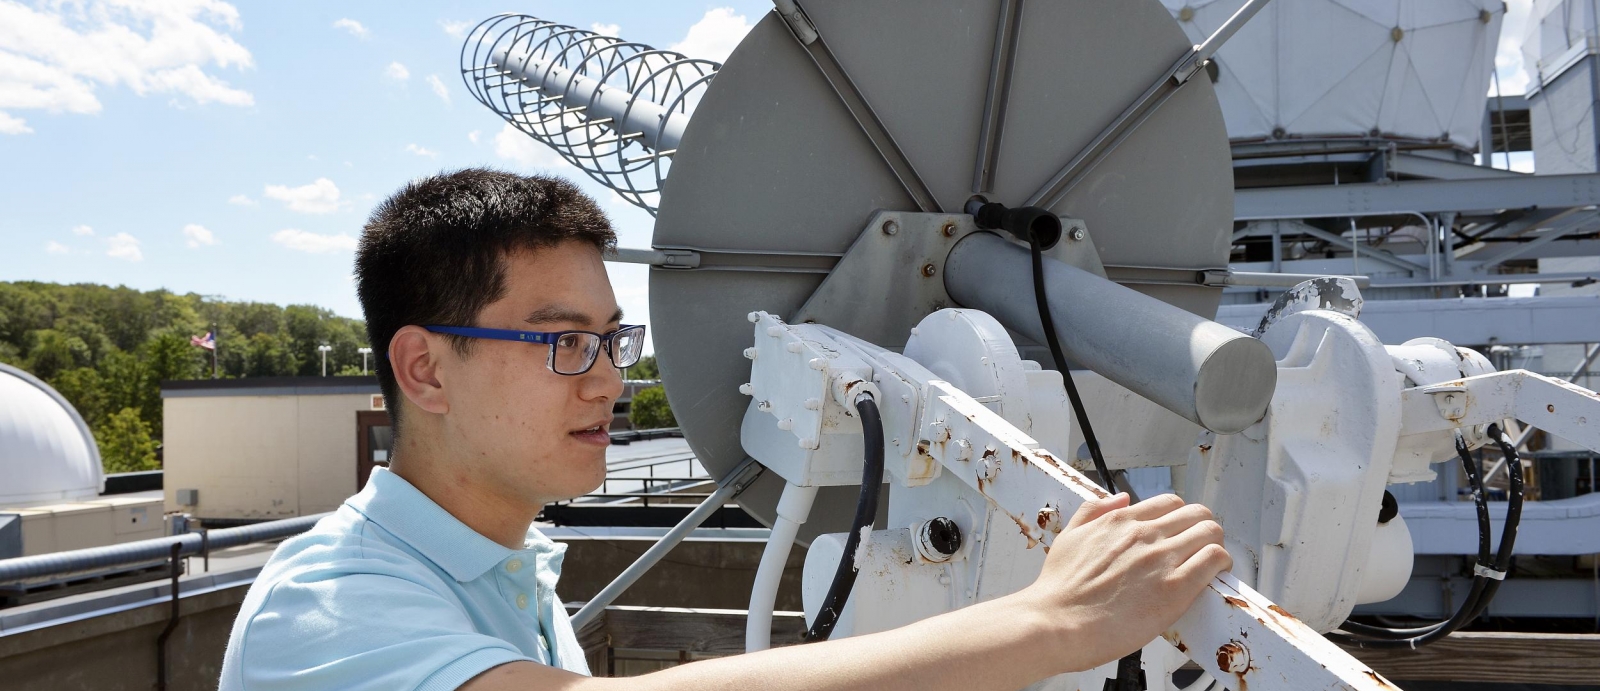 Summer research student Alan Dong helped transition the LES-9 satellite’s original analog communication devices to digital platforms during his internship.